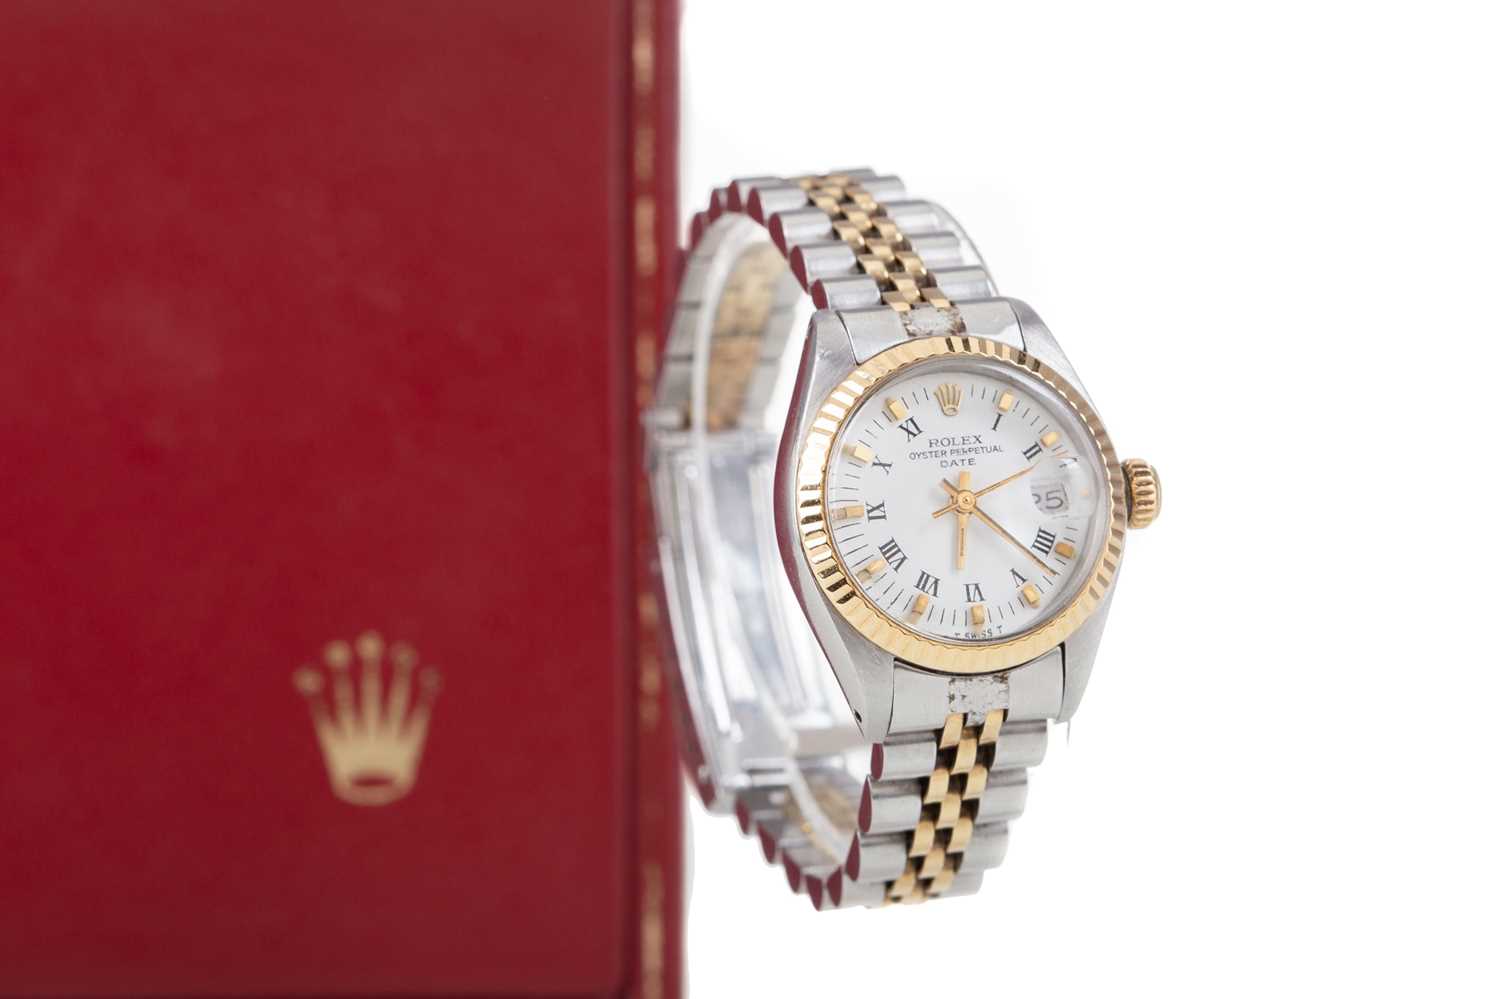 Lot 825 - A LADY'S ROLEX OYSTER PERPETUAL DATE AUTOMATIC WRIST WATCH